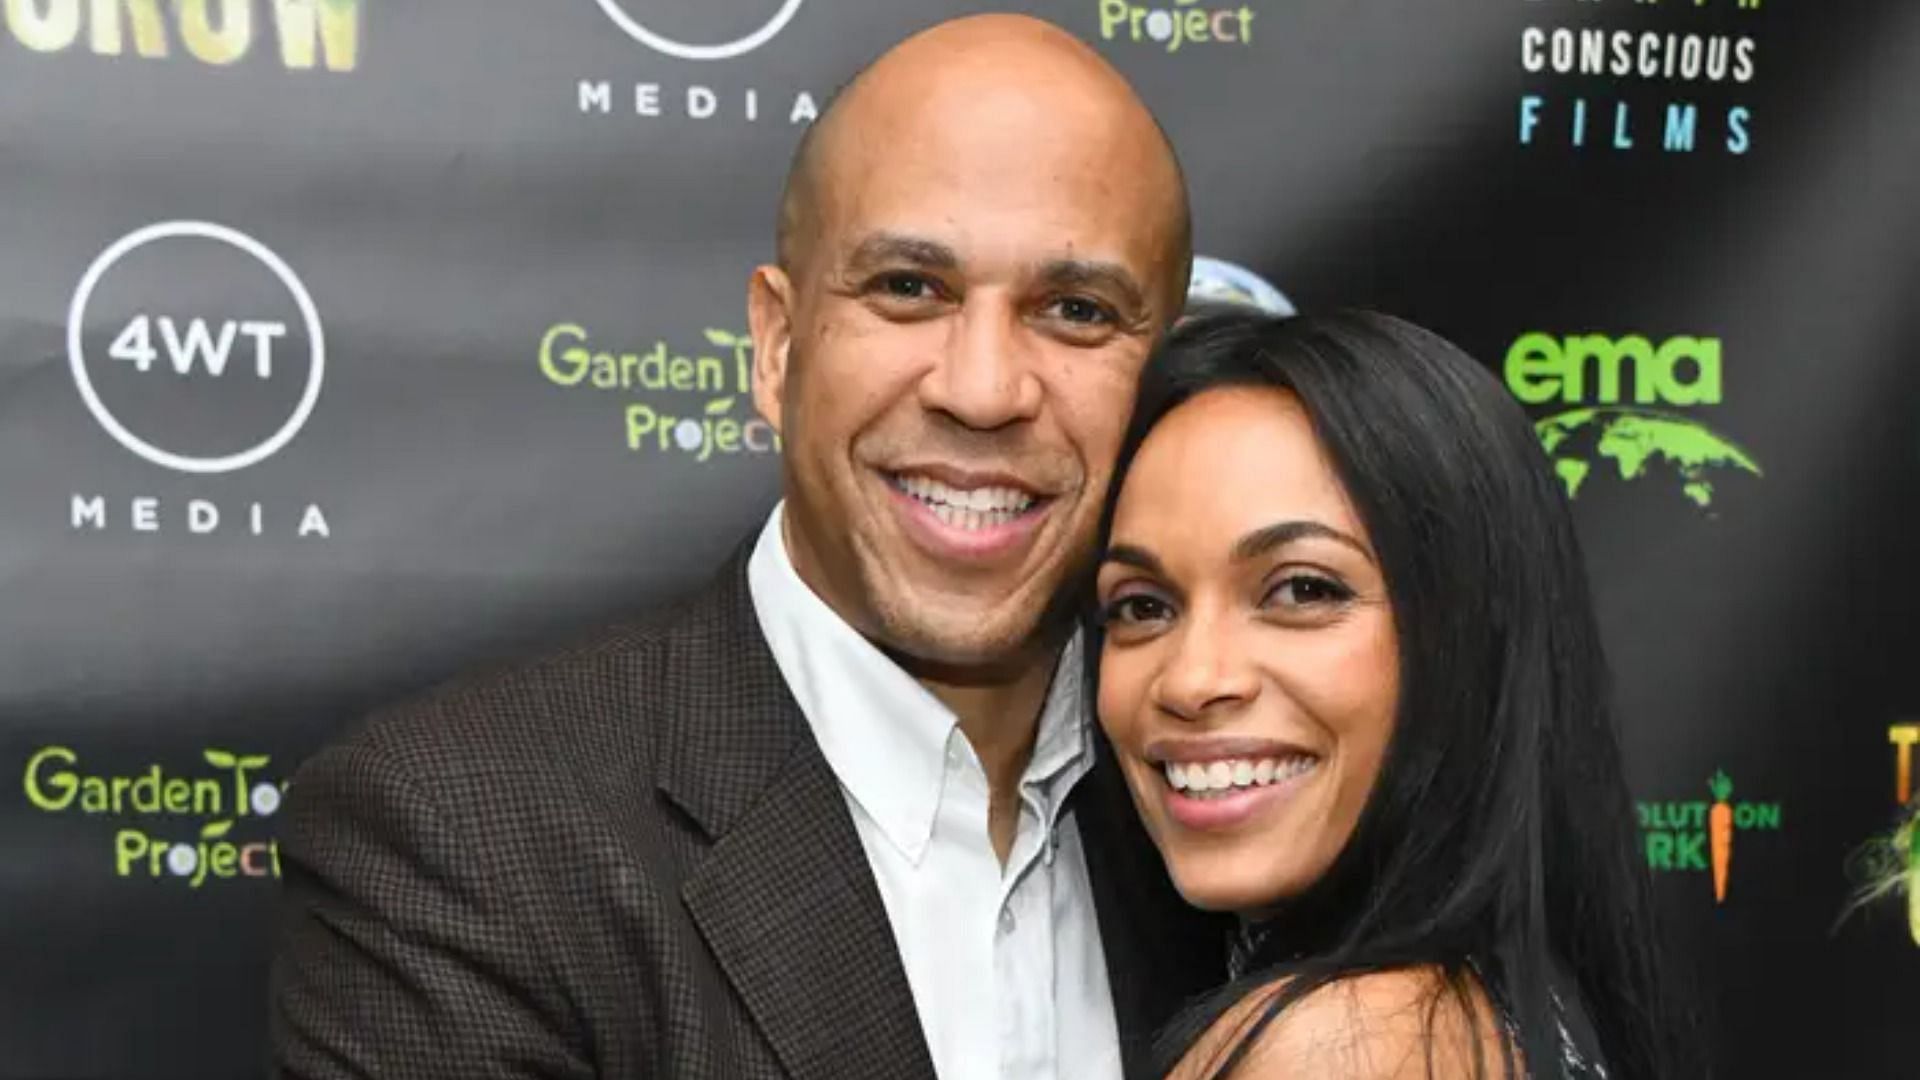 Rosario Dawson and Cory Booker crossed each other&#039;s paths in 2017 at a mutual friend&#039;s fundraising event (Image via Getty Images/ Araya Doheny)